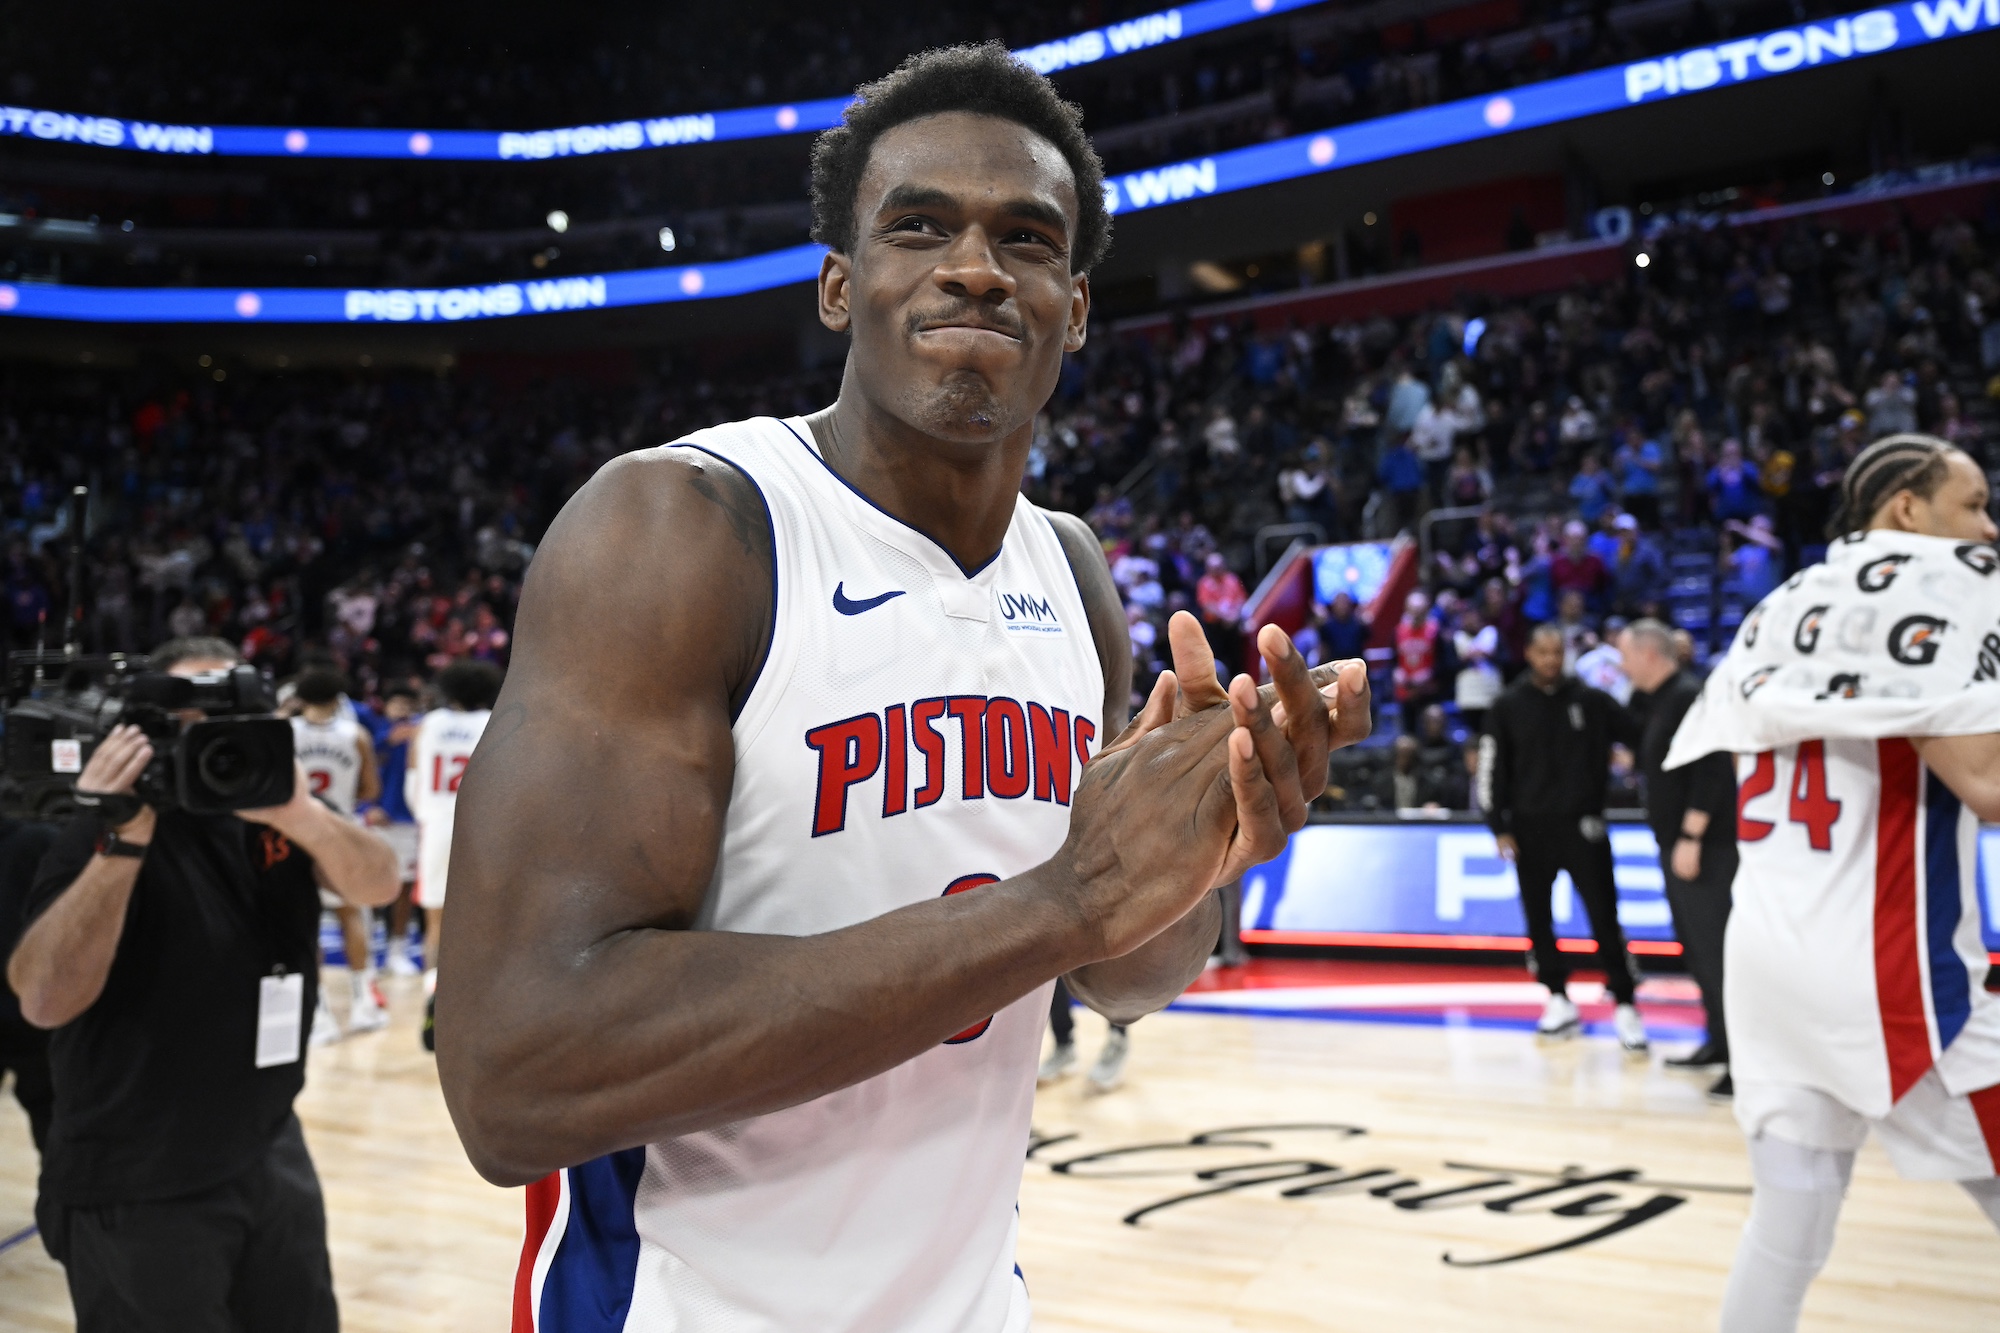 DETROIT, MI - DECEMBER 30: Jalen Duren #0 of the Detroit Pistons smiles after the game against the Toronto Raptors on December 30, 2023 at Little Caesars Arena in Detroit, Michigan. NOTE TO USER: User expressly acknowledges and agrees that, by downloading and/or using this photograph, User is consenting to the terms and conditions of the Getty Images License Agreement. Mandatory Copyright Notice: Copyright 2023 NBAE (Photo by Chris Schwegler/NBAE via Getty Images)